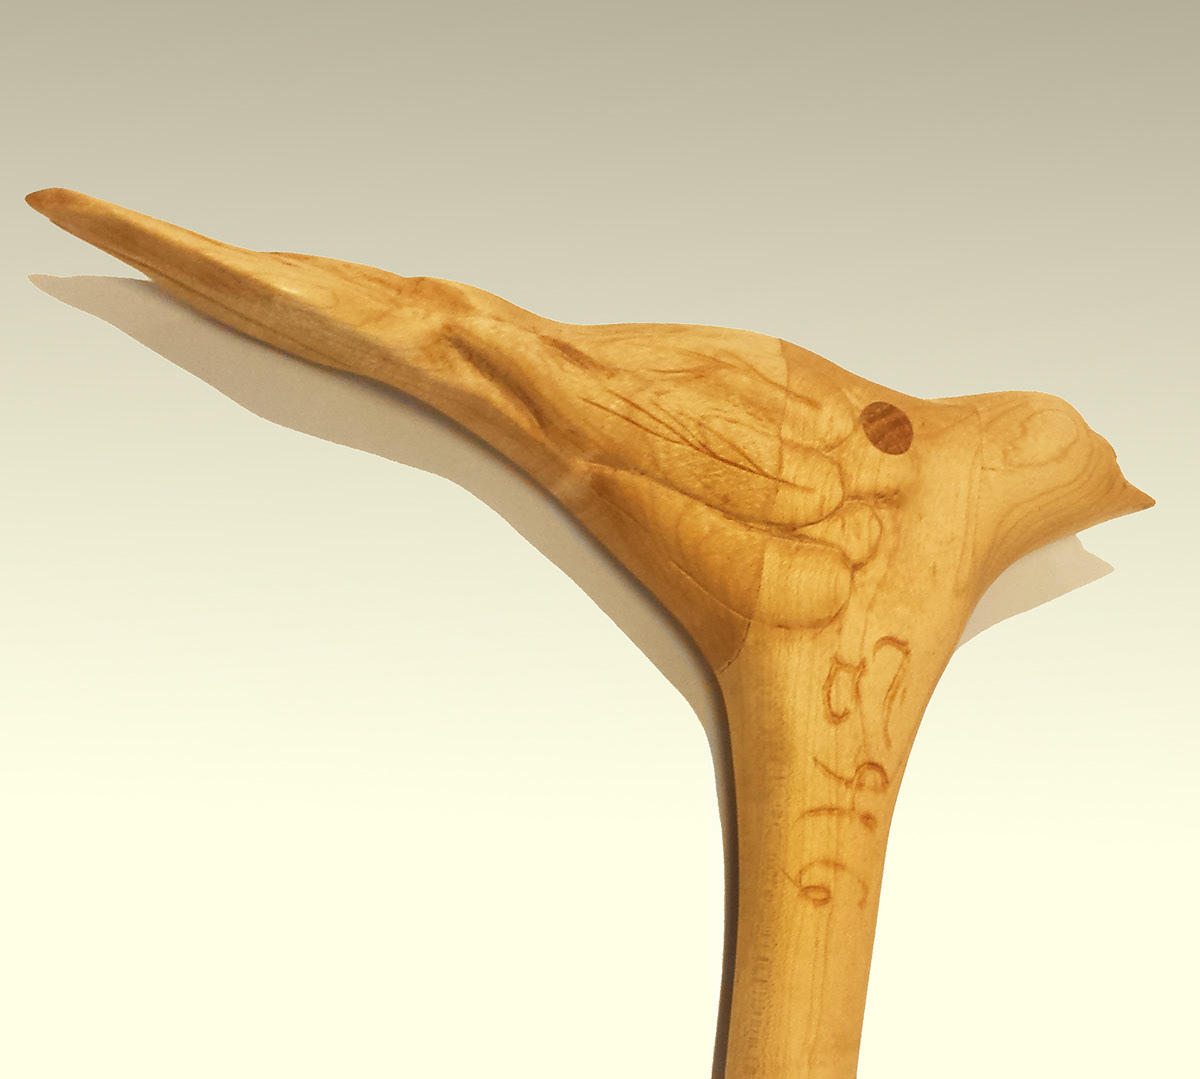 Cane wood maple bird handle walking hand carved